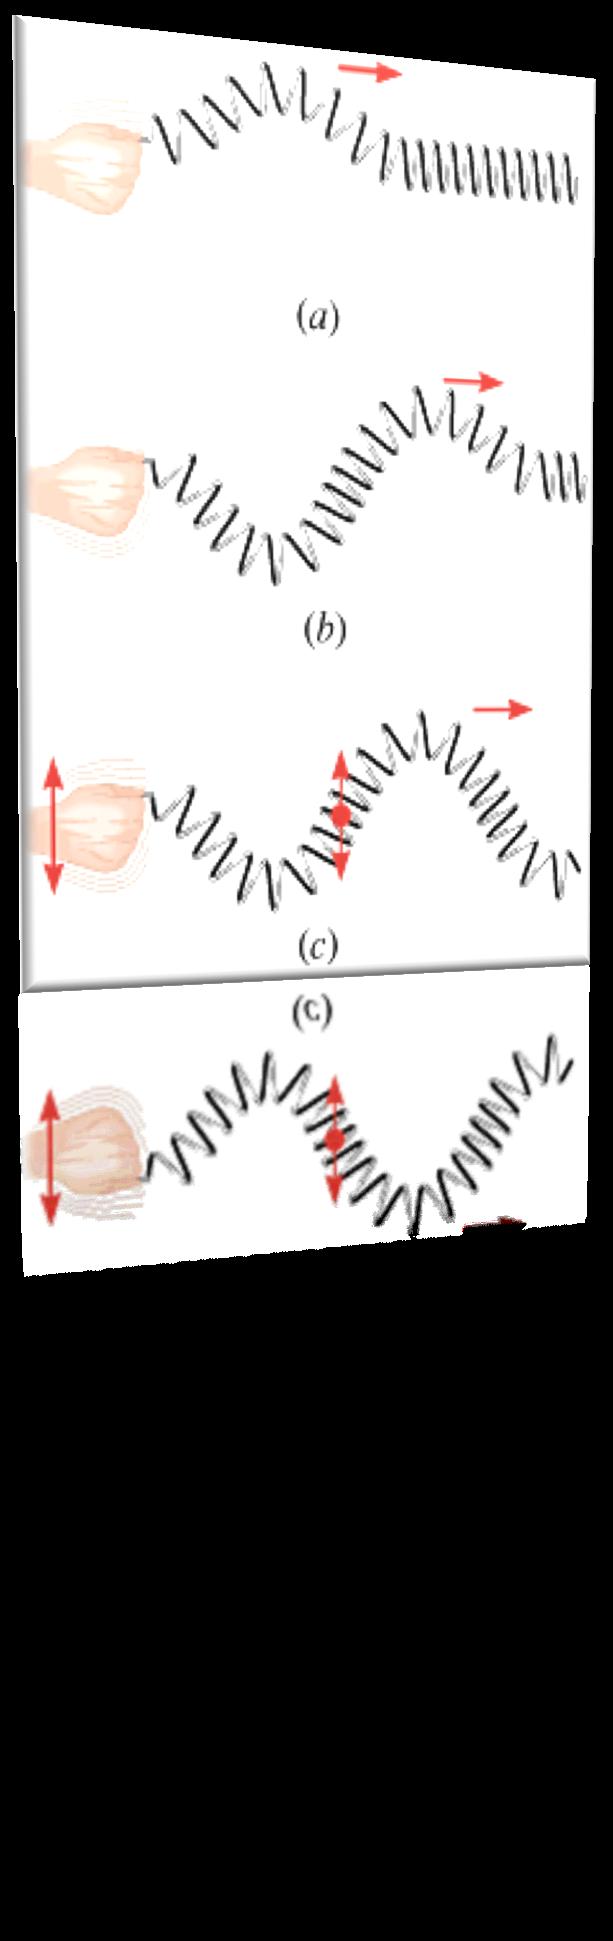 Transverse Waves A transverse wave is one